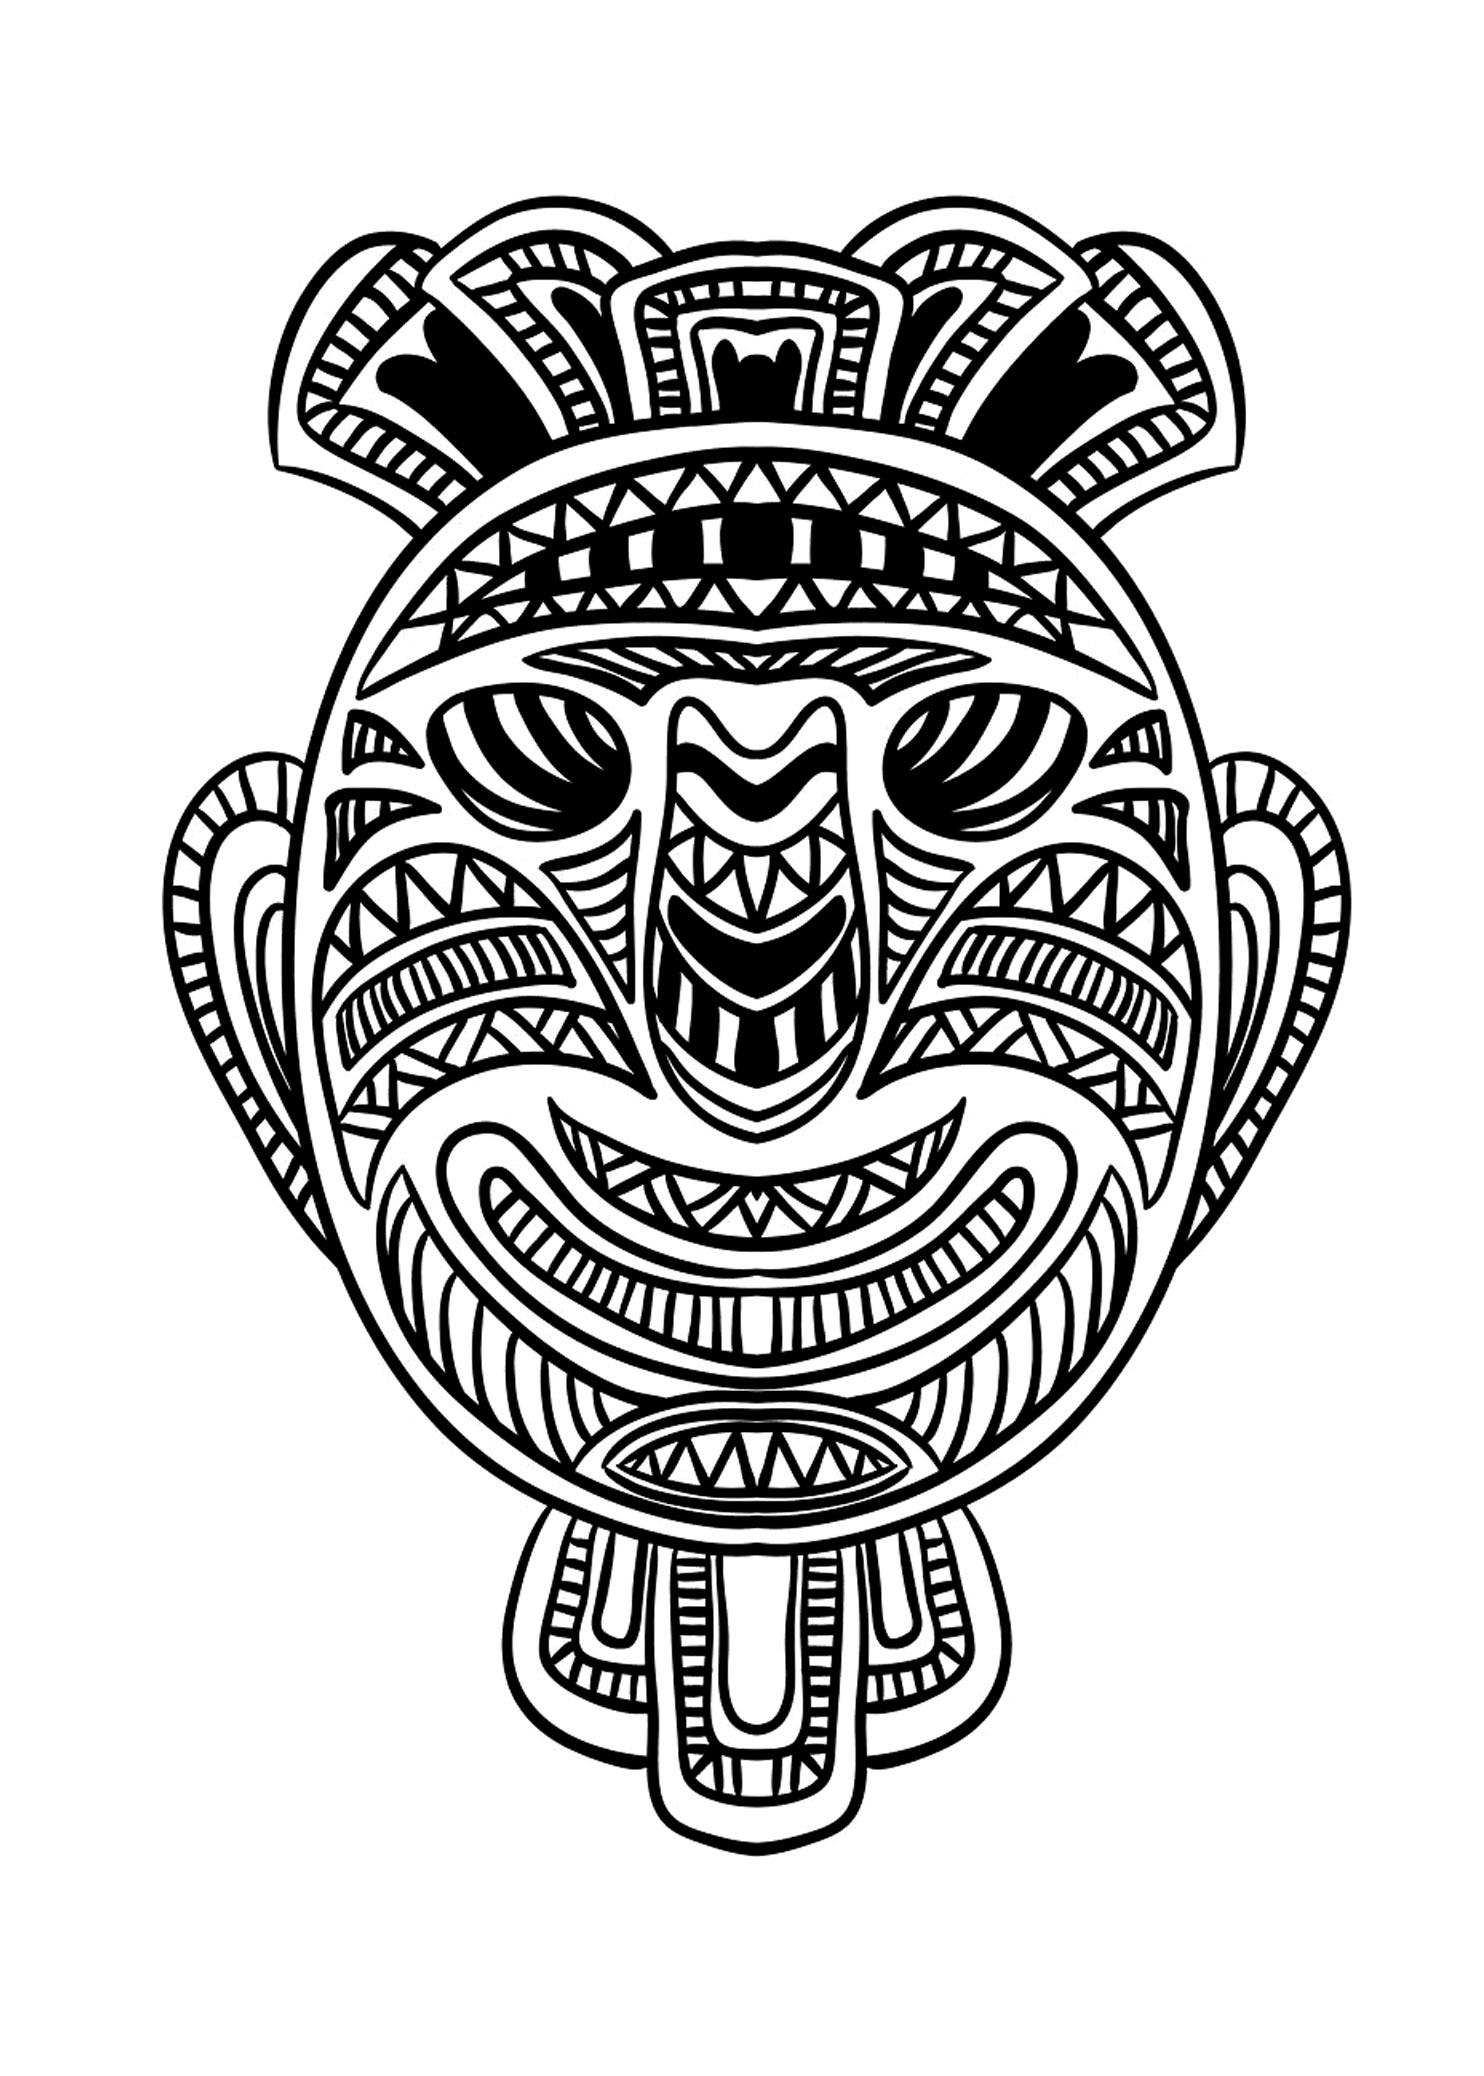 Fun Masks coloring pages to print and color